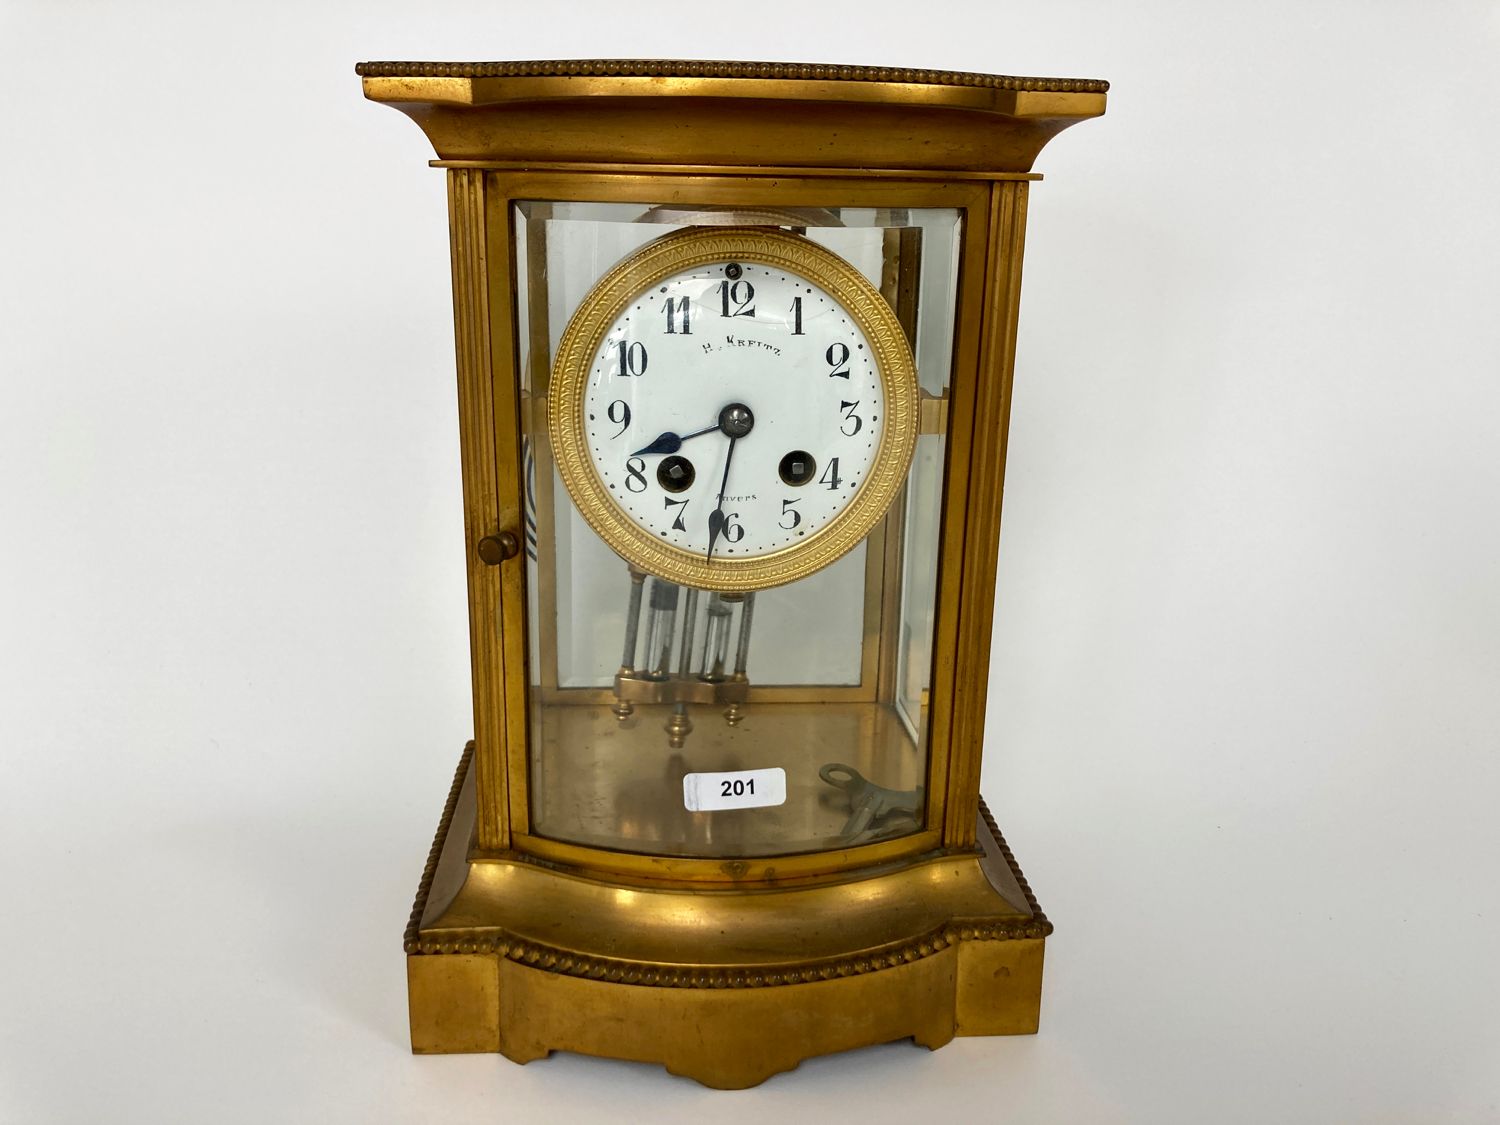 KREITZ - ANVERS Cage clock with curved front, late 19th-early 20th century, bras&hellip;